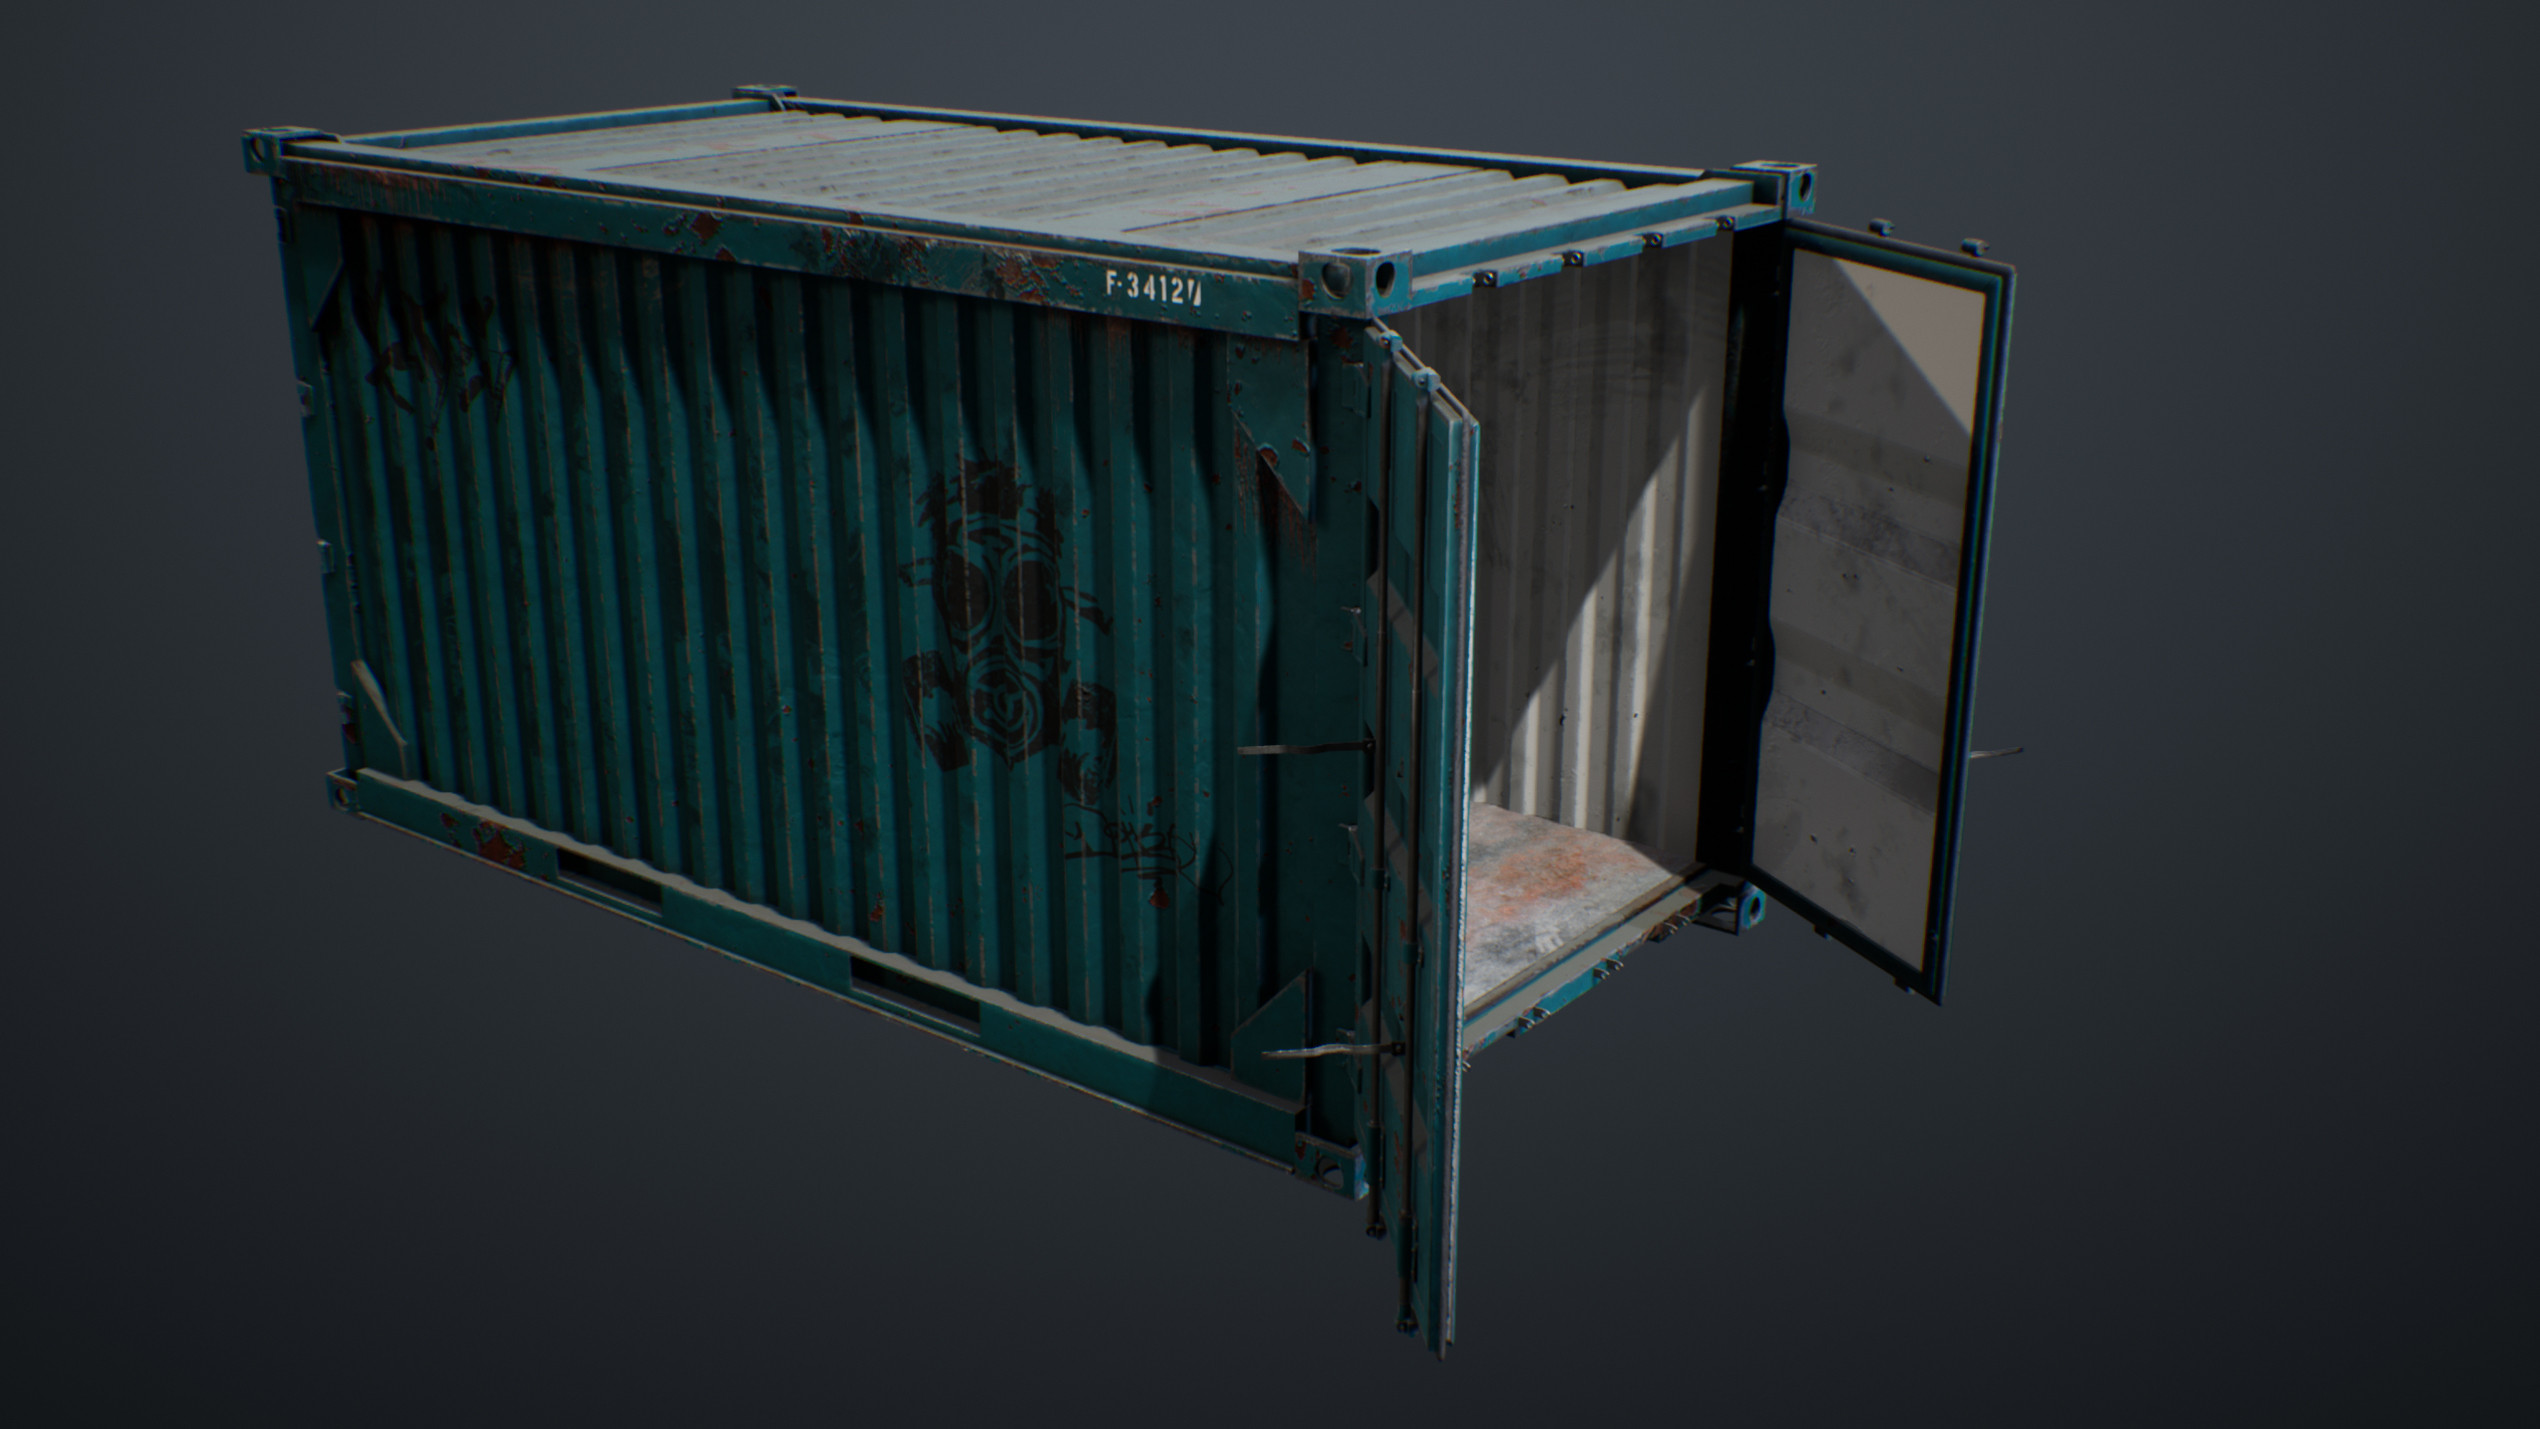 UE4 screenshot of the container top view.